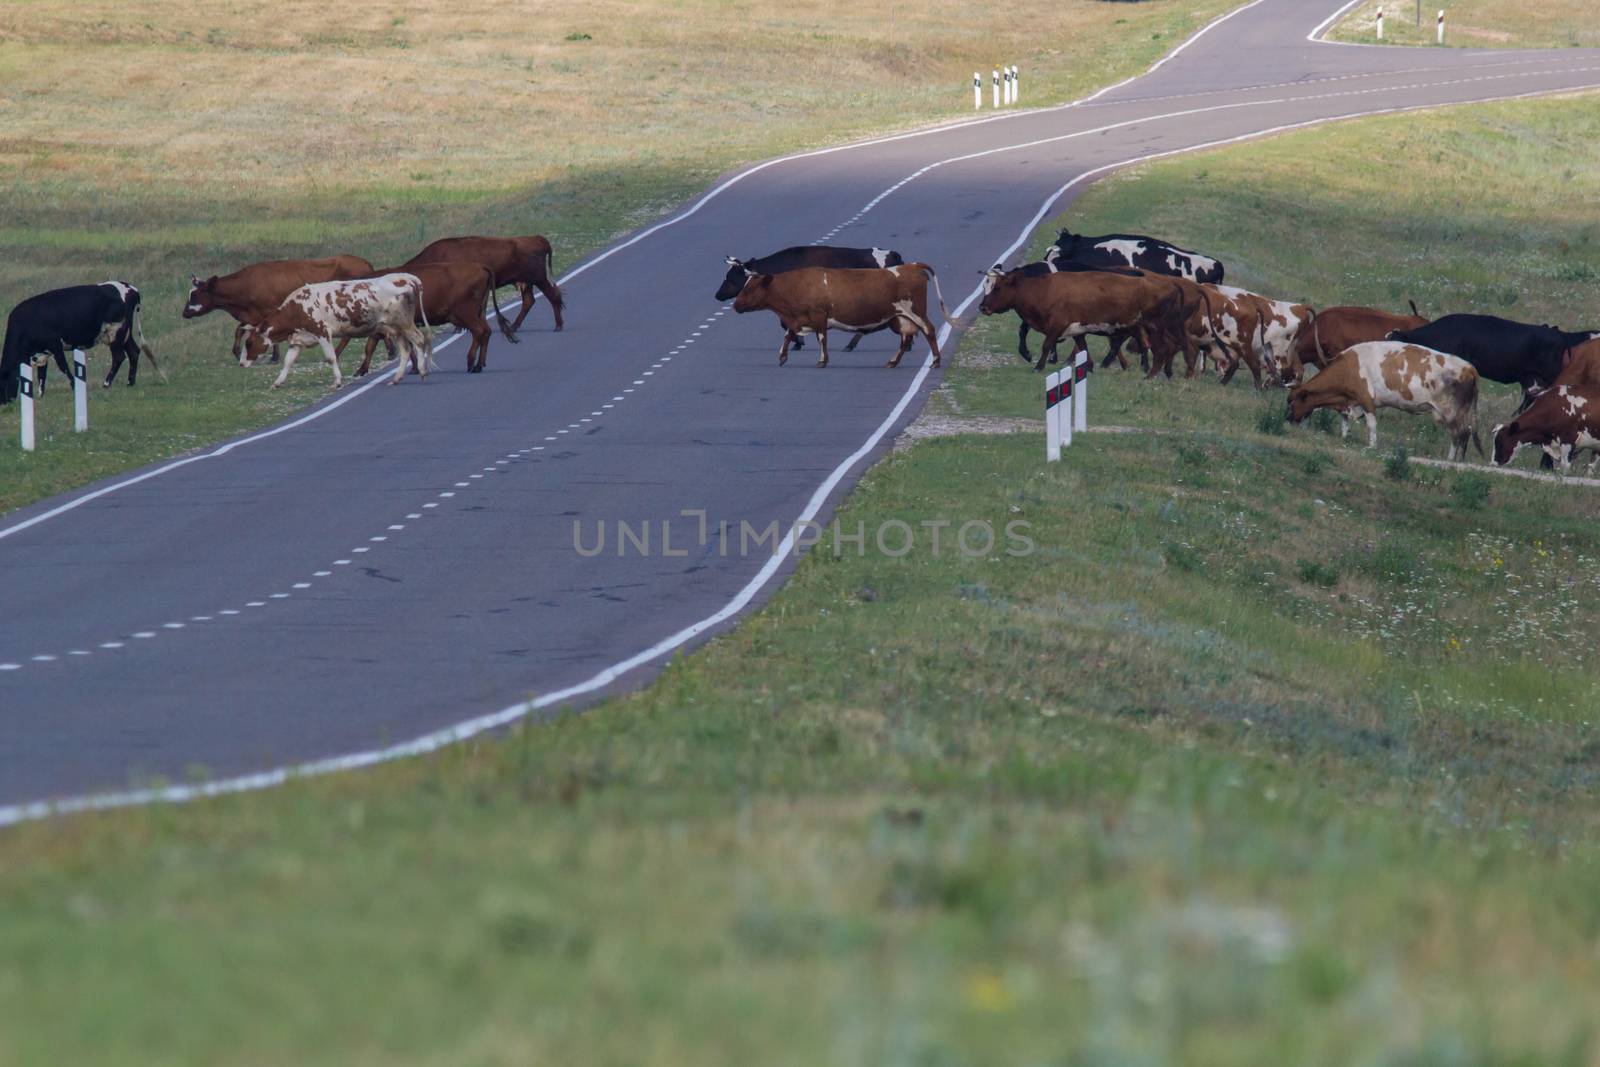 A herd of cows on the road in the steppe, cross the road